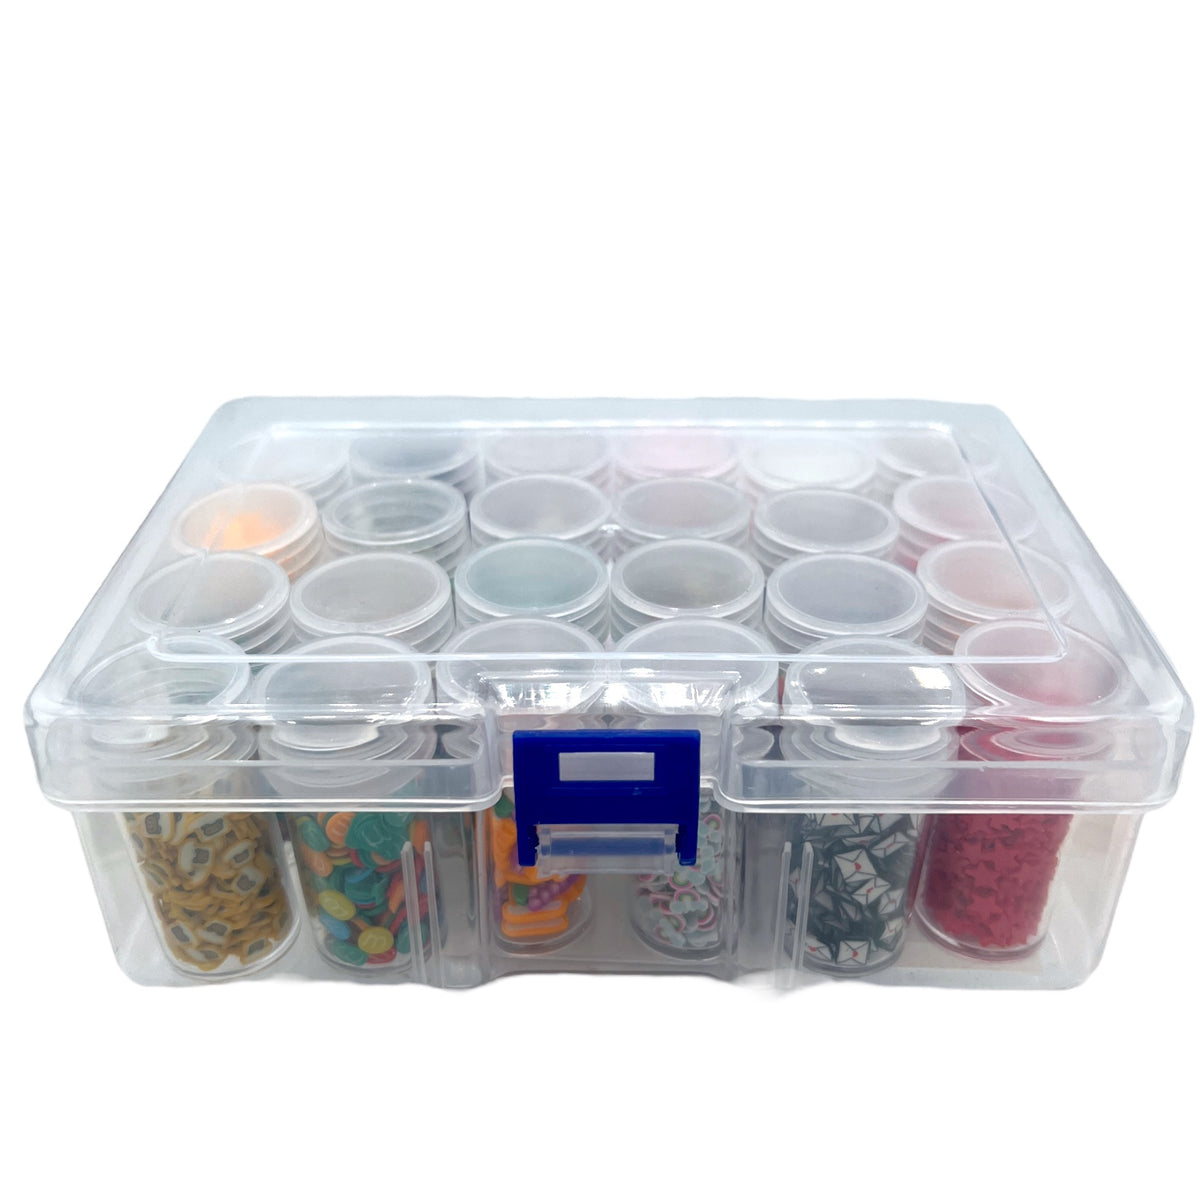 Claynation 24 Clay Kit with FREE Tube Compartment Container Crafting Organizer Box